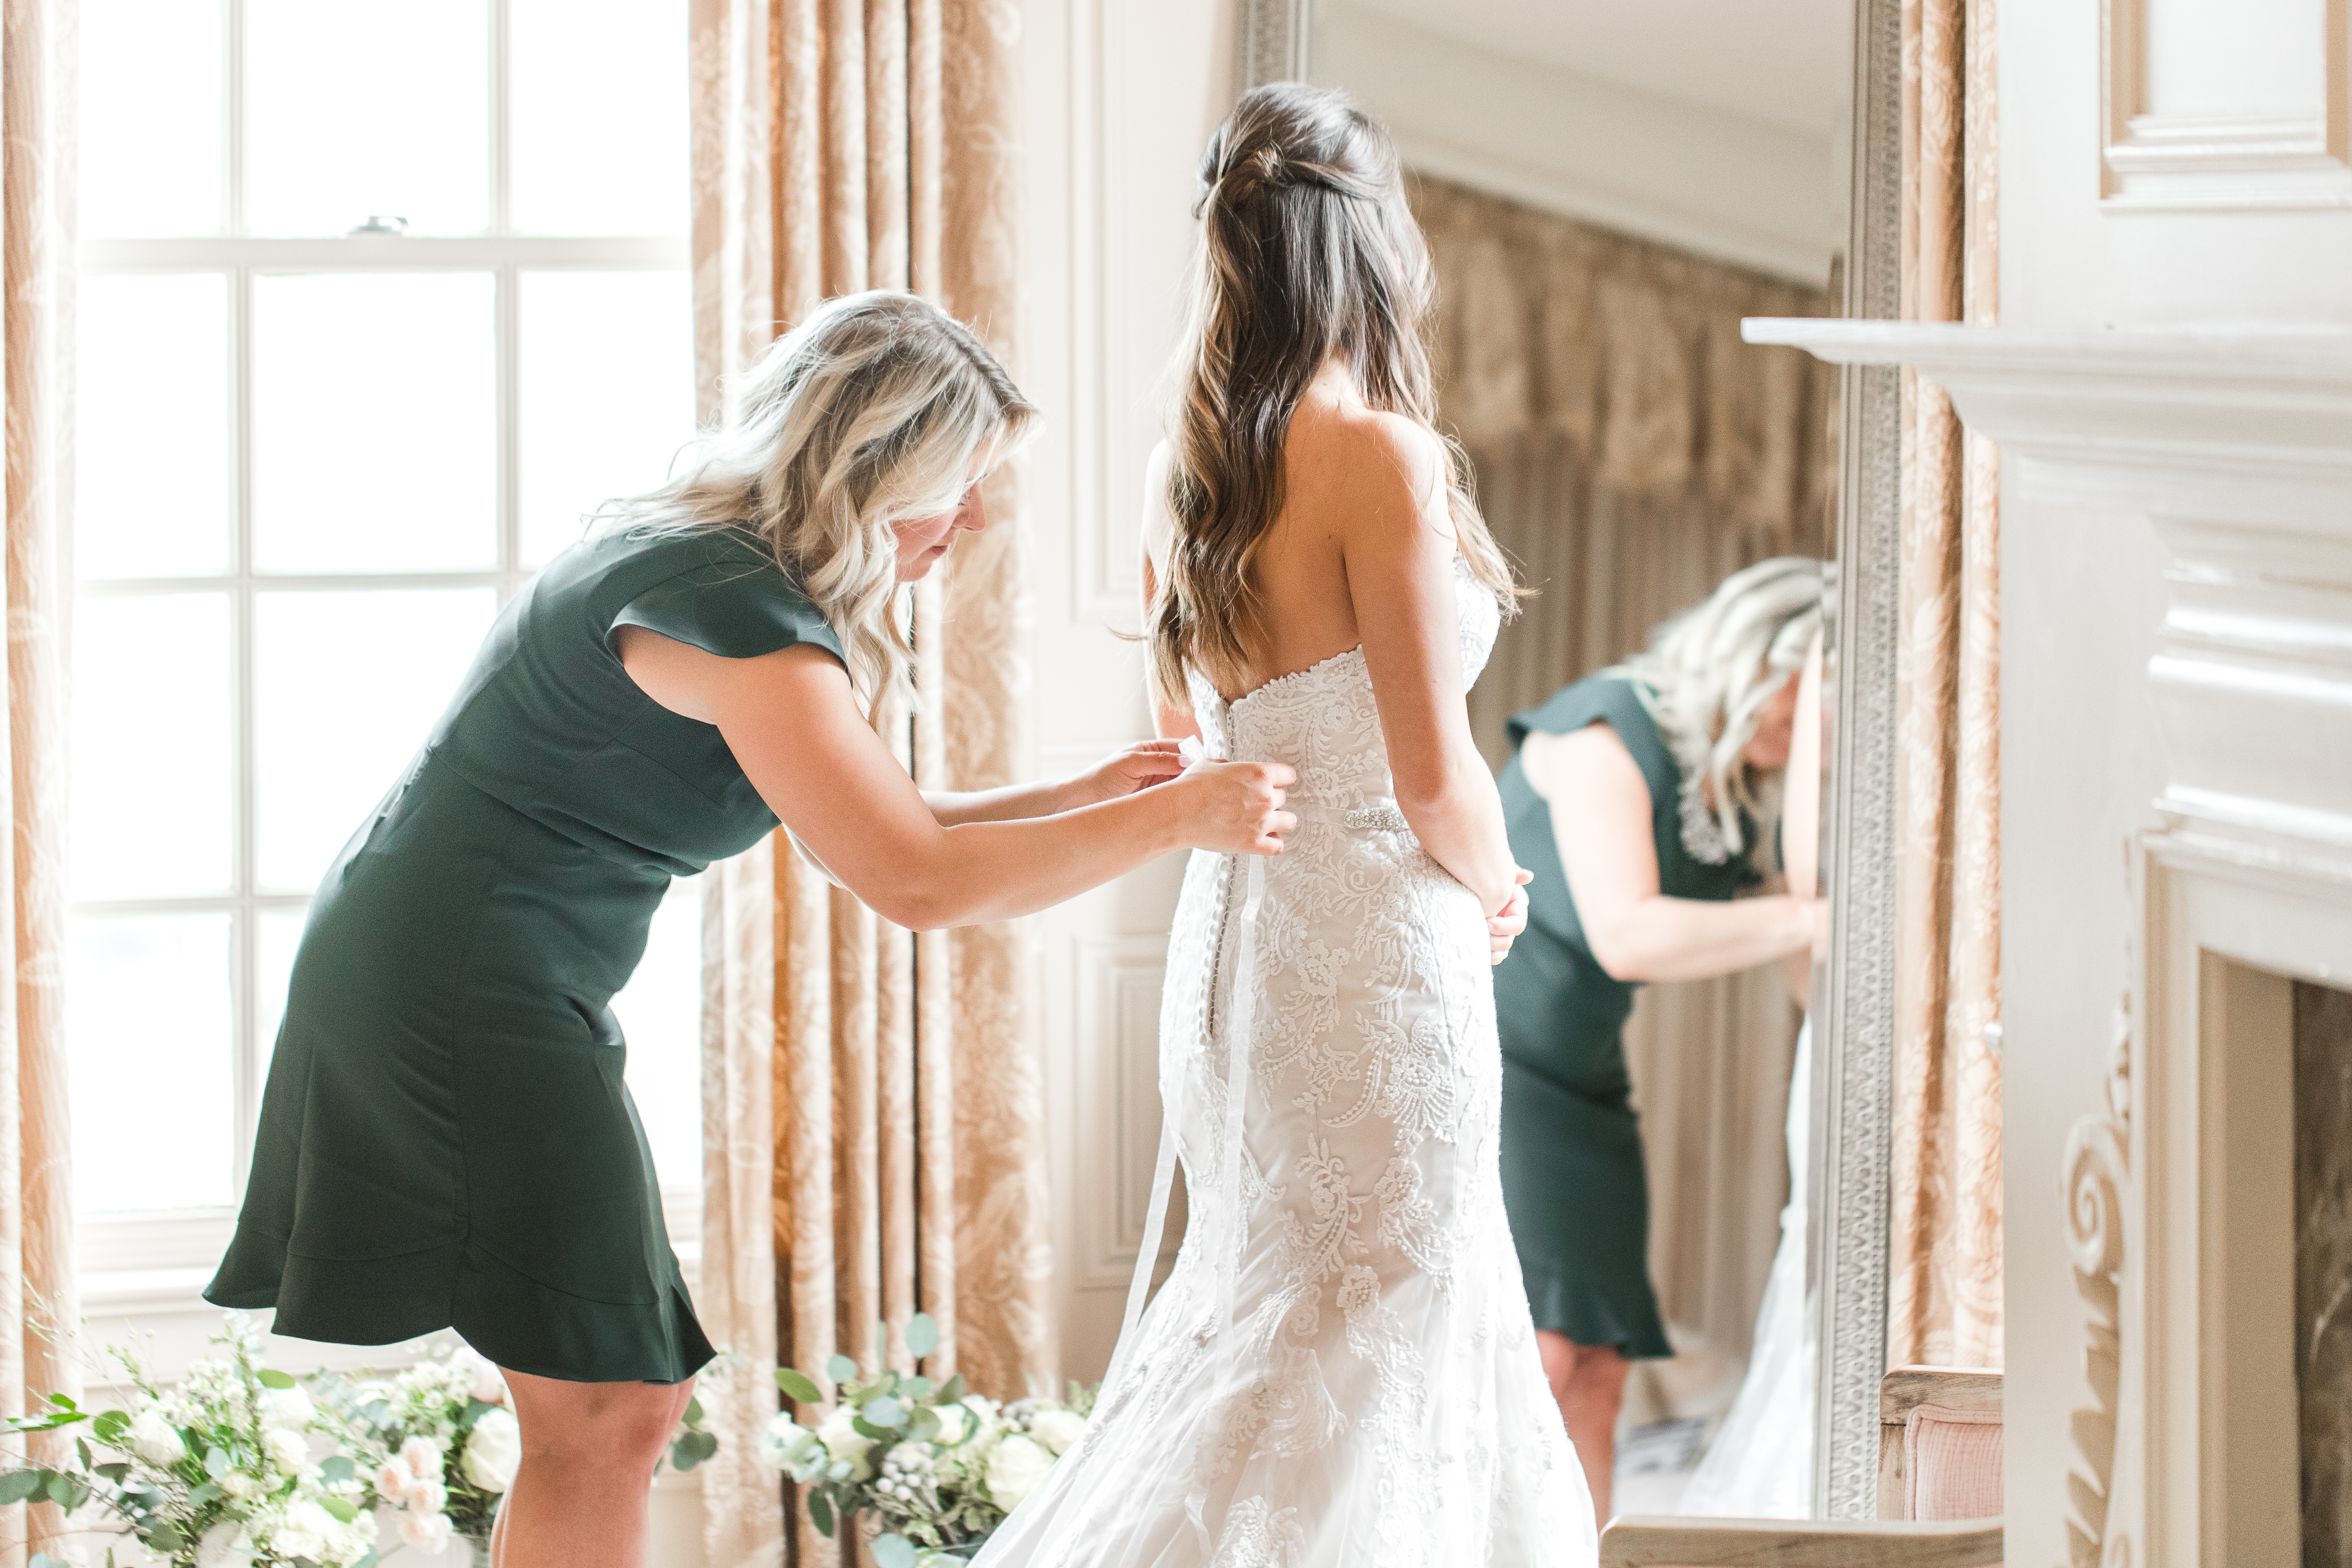 Hiring A Wedding Planner, helping the bride get into her dress